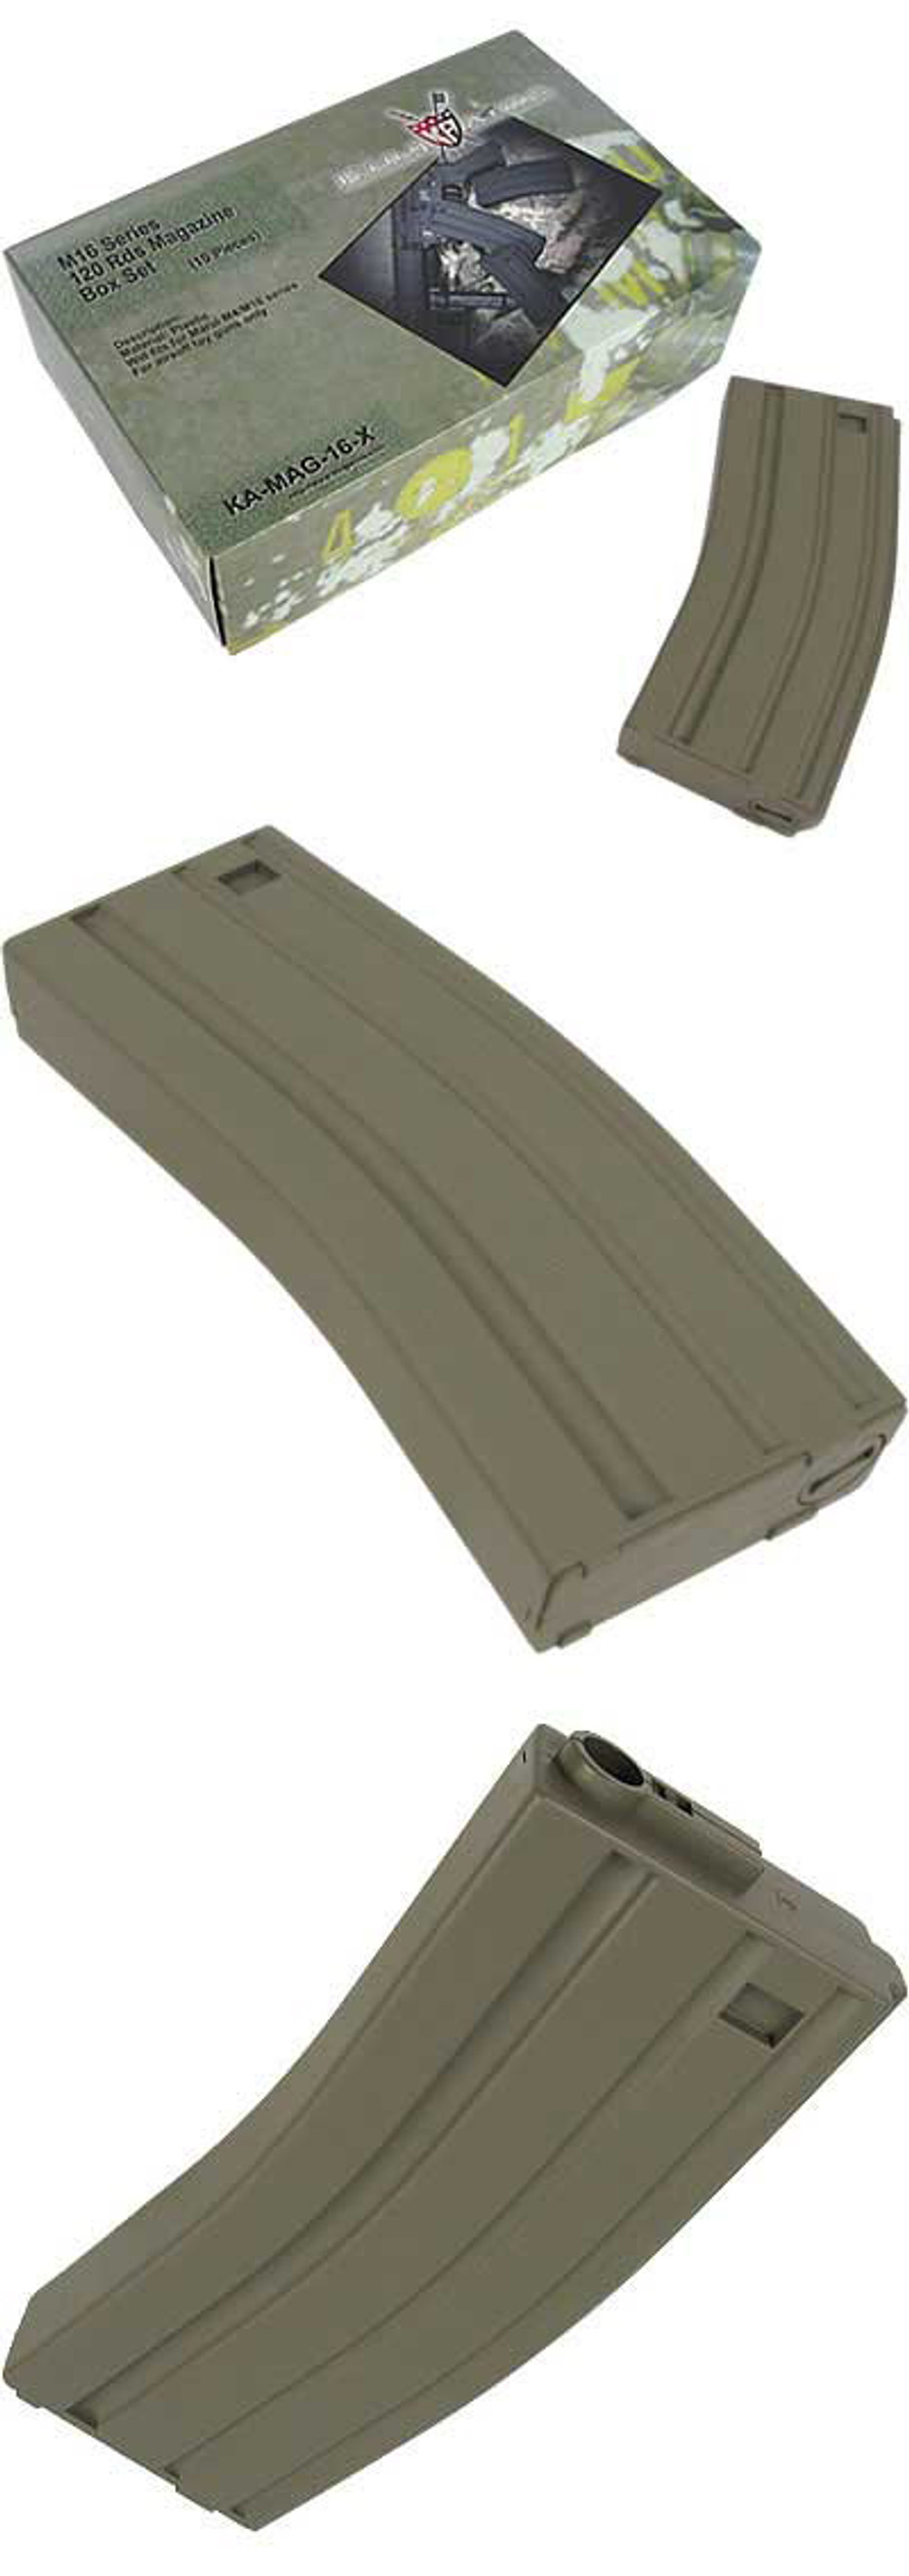 King Arms 120 rds Mid-Cap Magazine For M4 M16 Airsoft AEG - Desert (Box of 10)